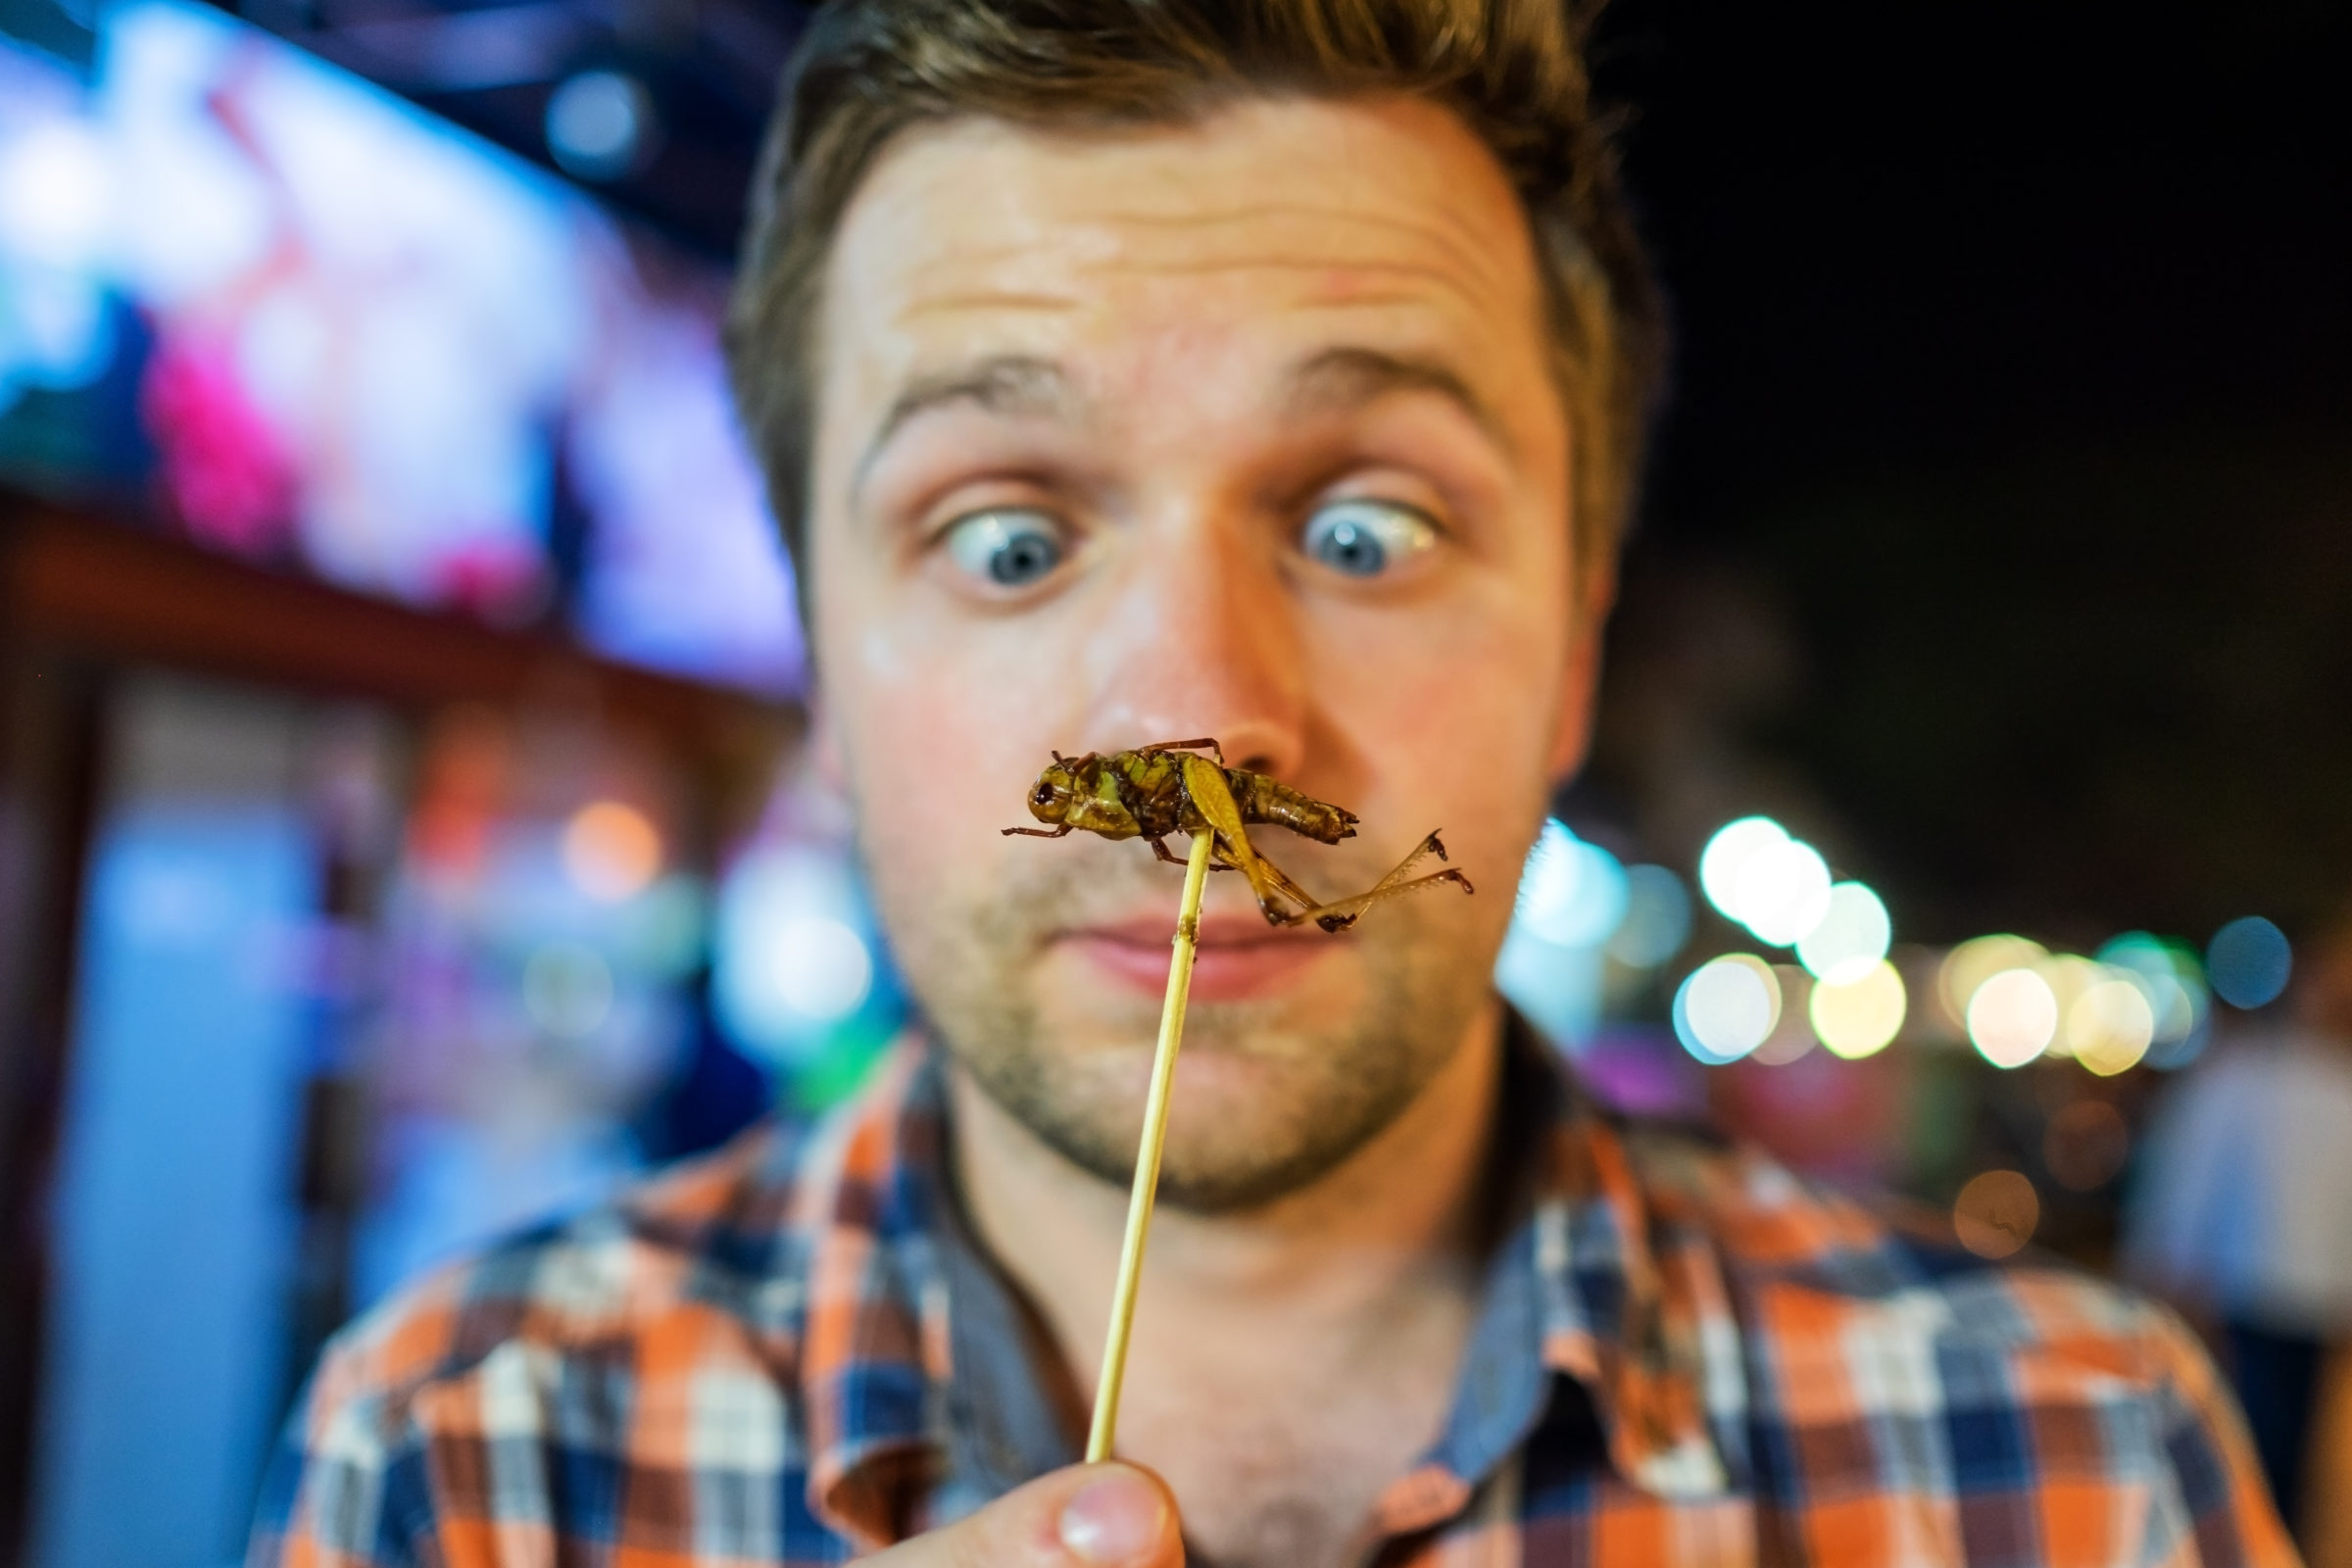 Caucasian young male eating cricket at night market in Thailand.